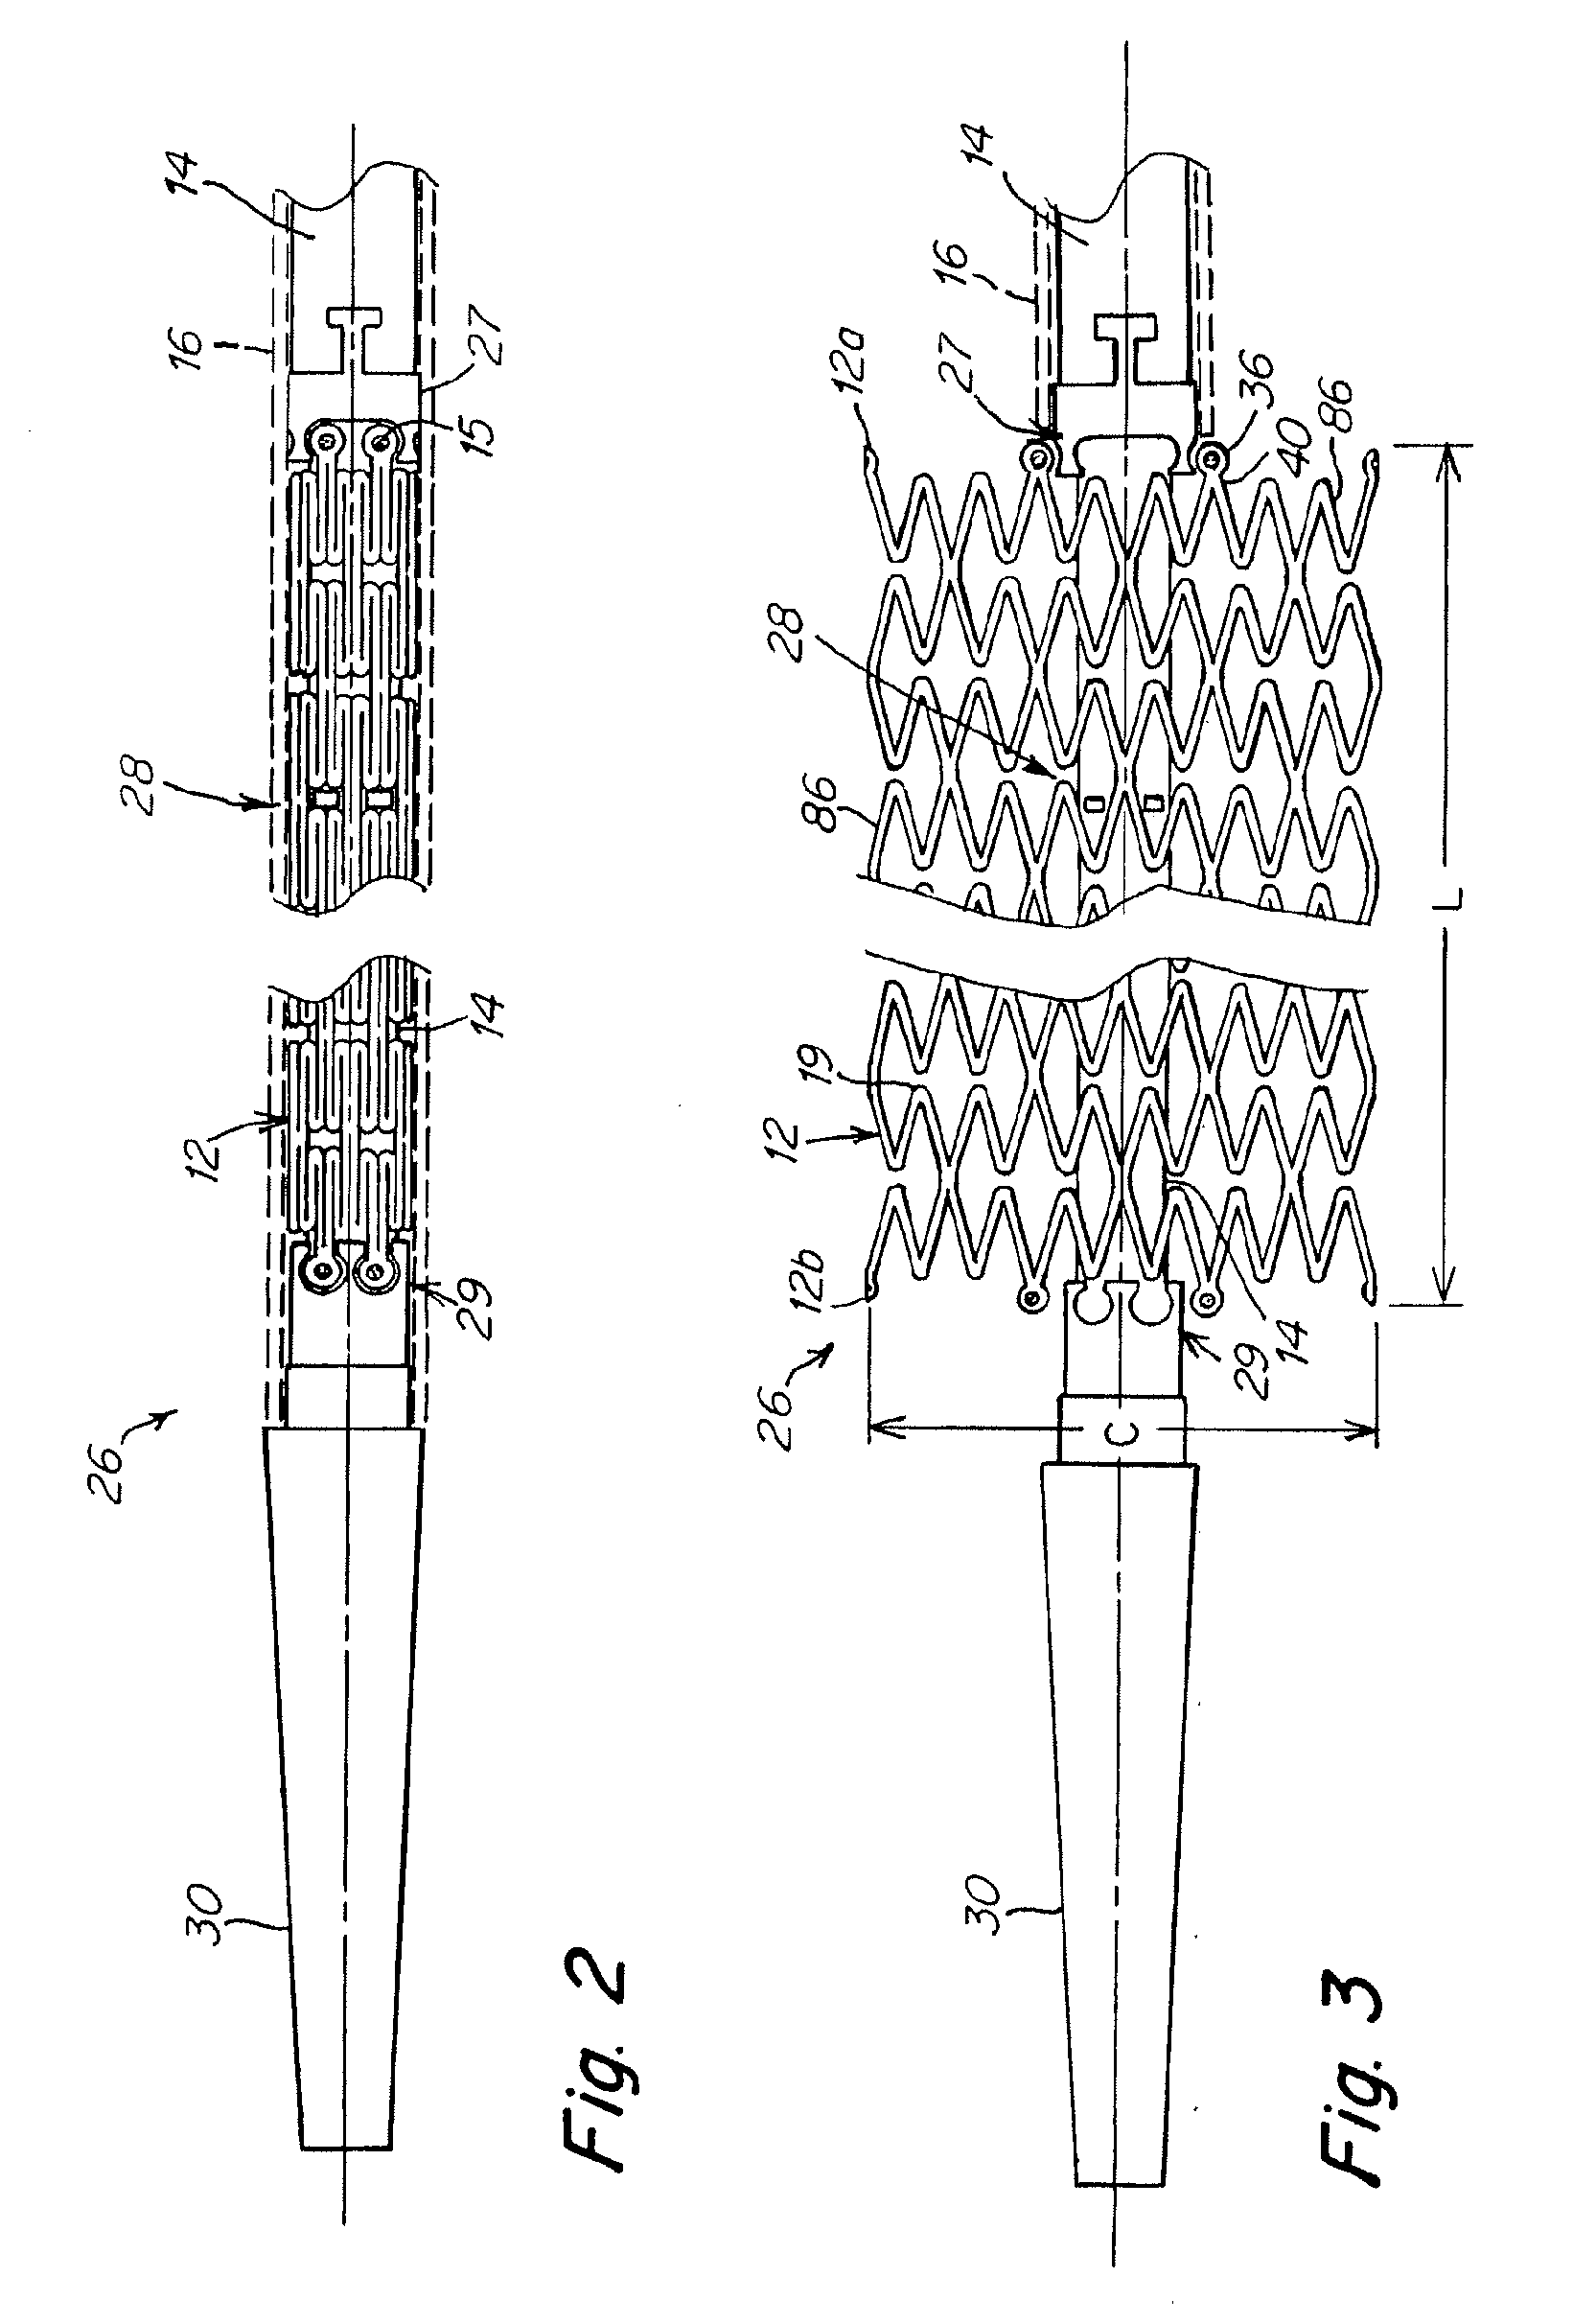 Implant and delivery system with multiple marker interlocks